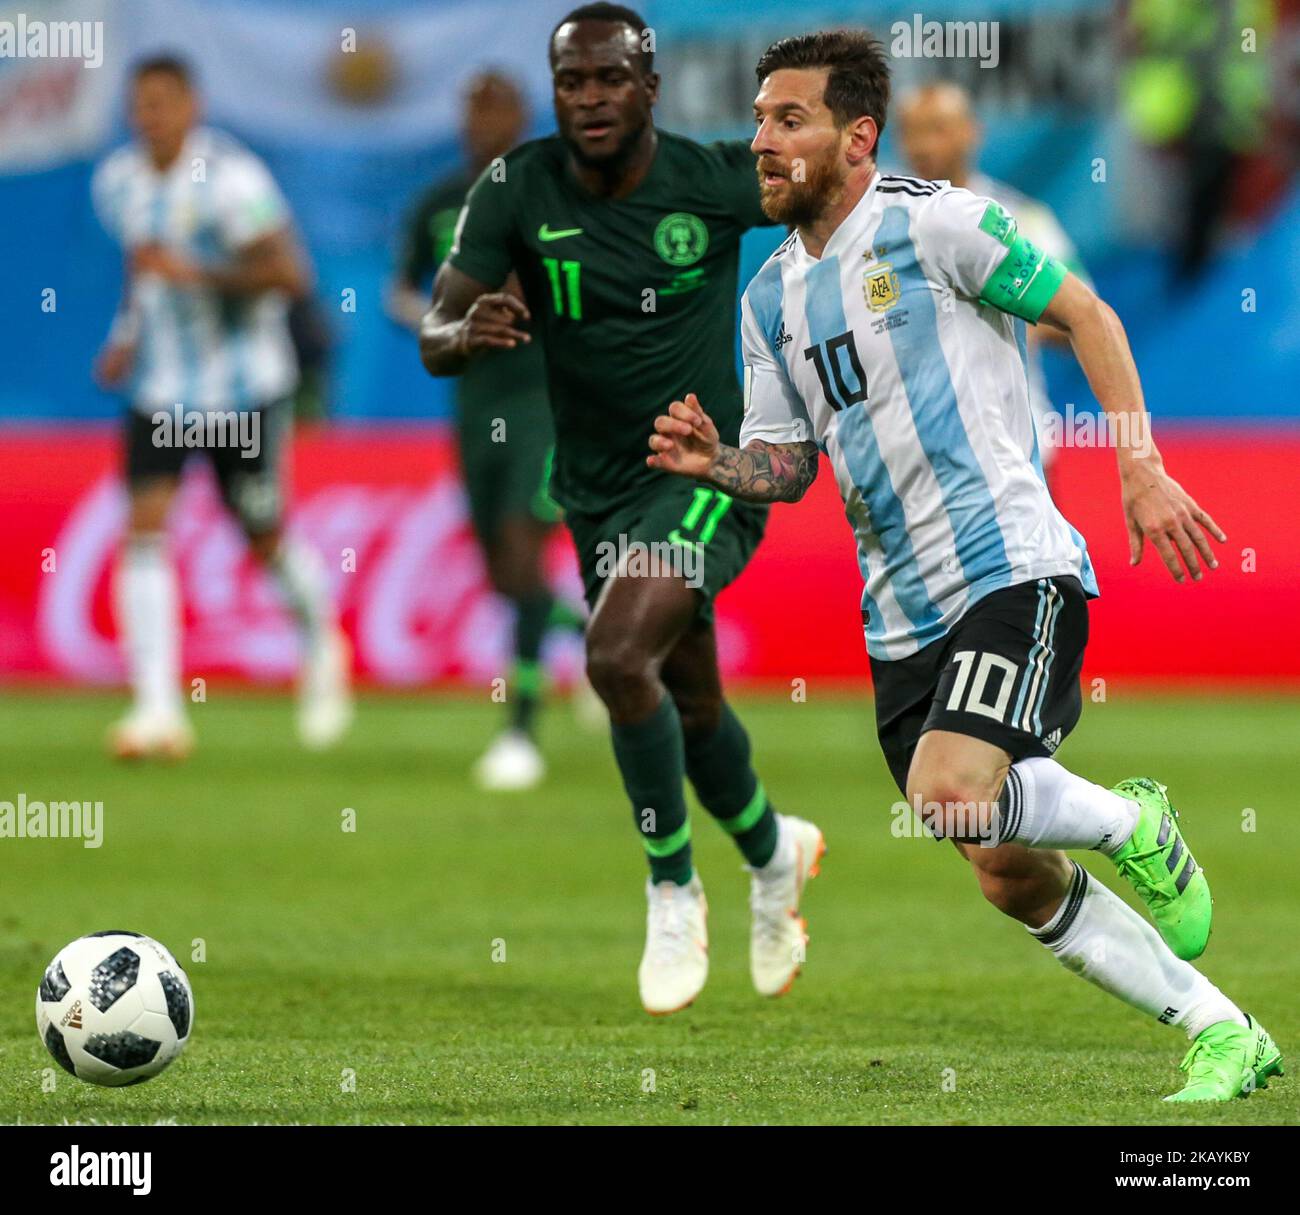 Lionel Messi of the Argentina national football team vie for the ball during the 2018 FIFA World Cup match, first stage - Group D between Nigeria and Argentina at Saint Petersburg Stadium on June 26, 2018 in St. Petersburg, Russia. (Photo by Igor Russak/NurPhoto) Stock Photo